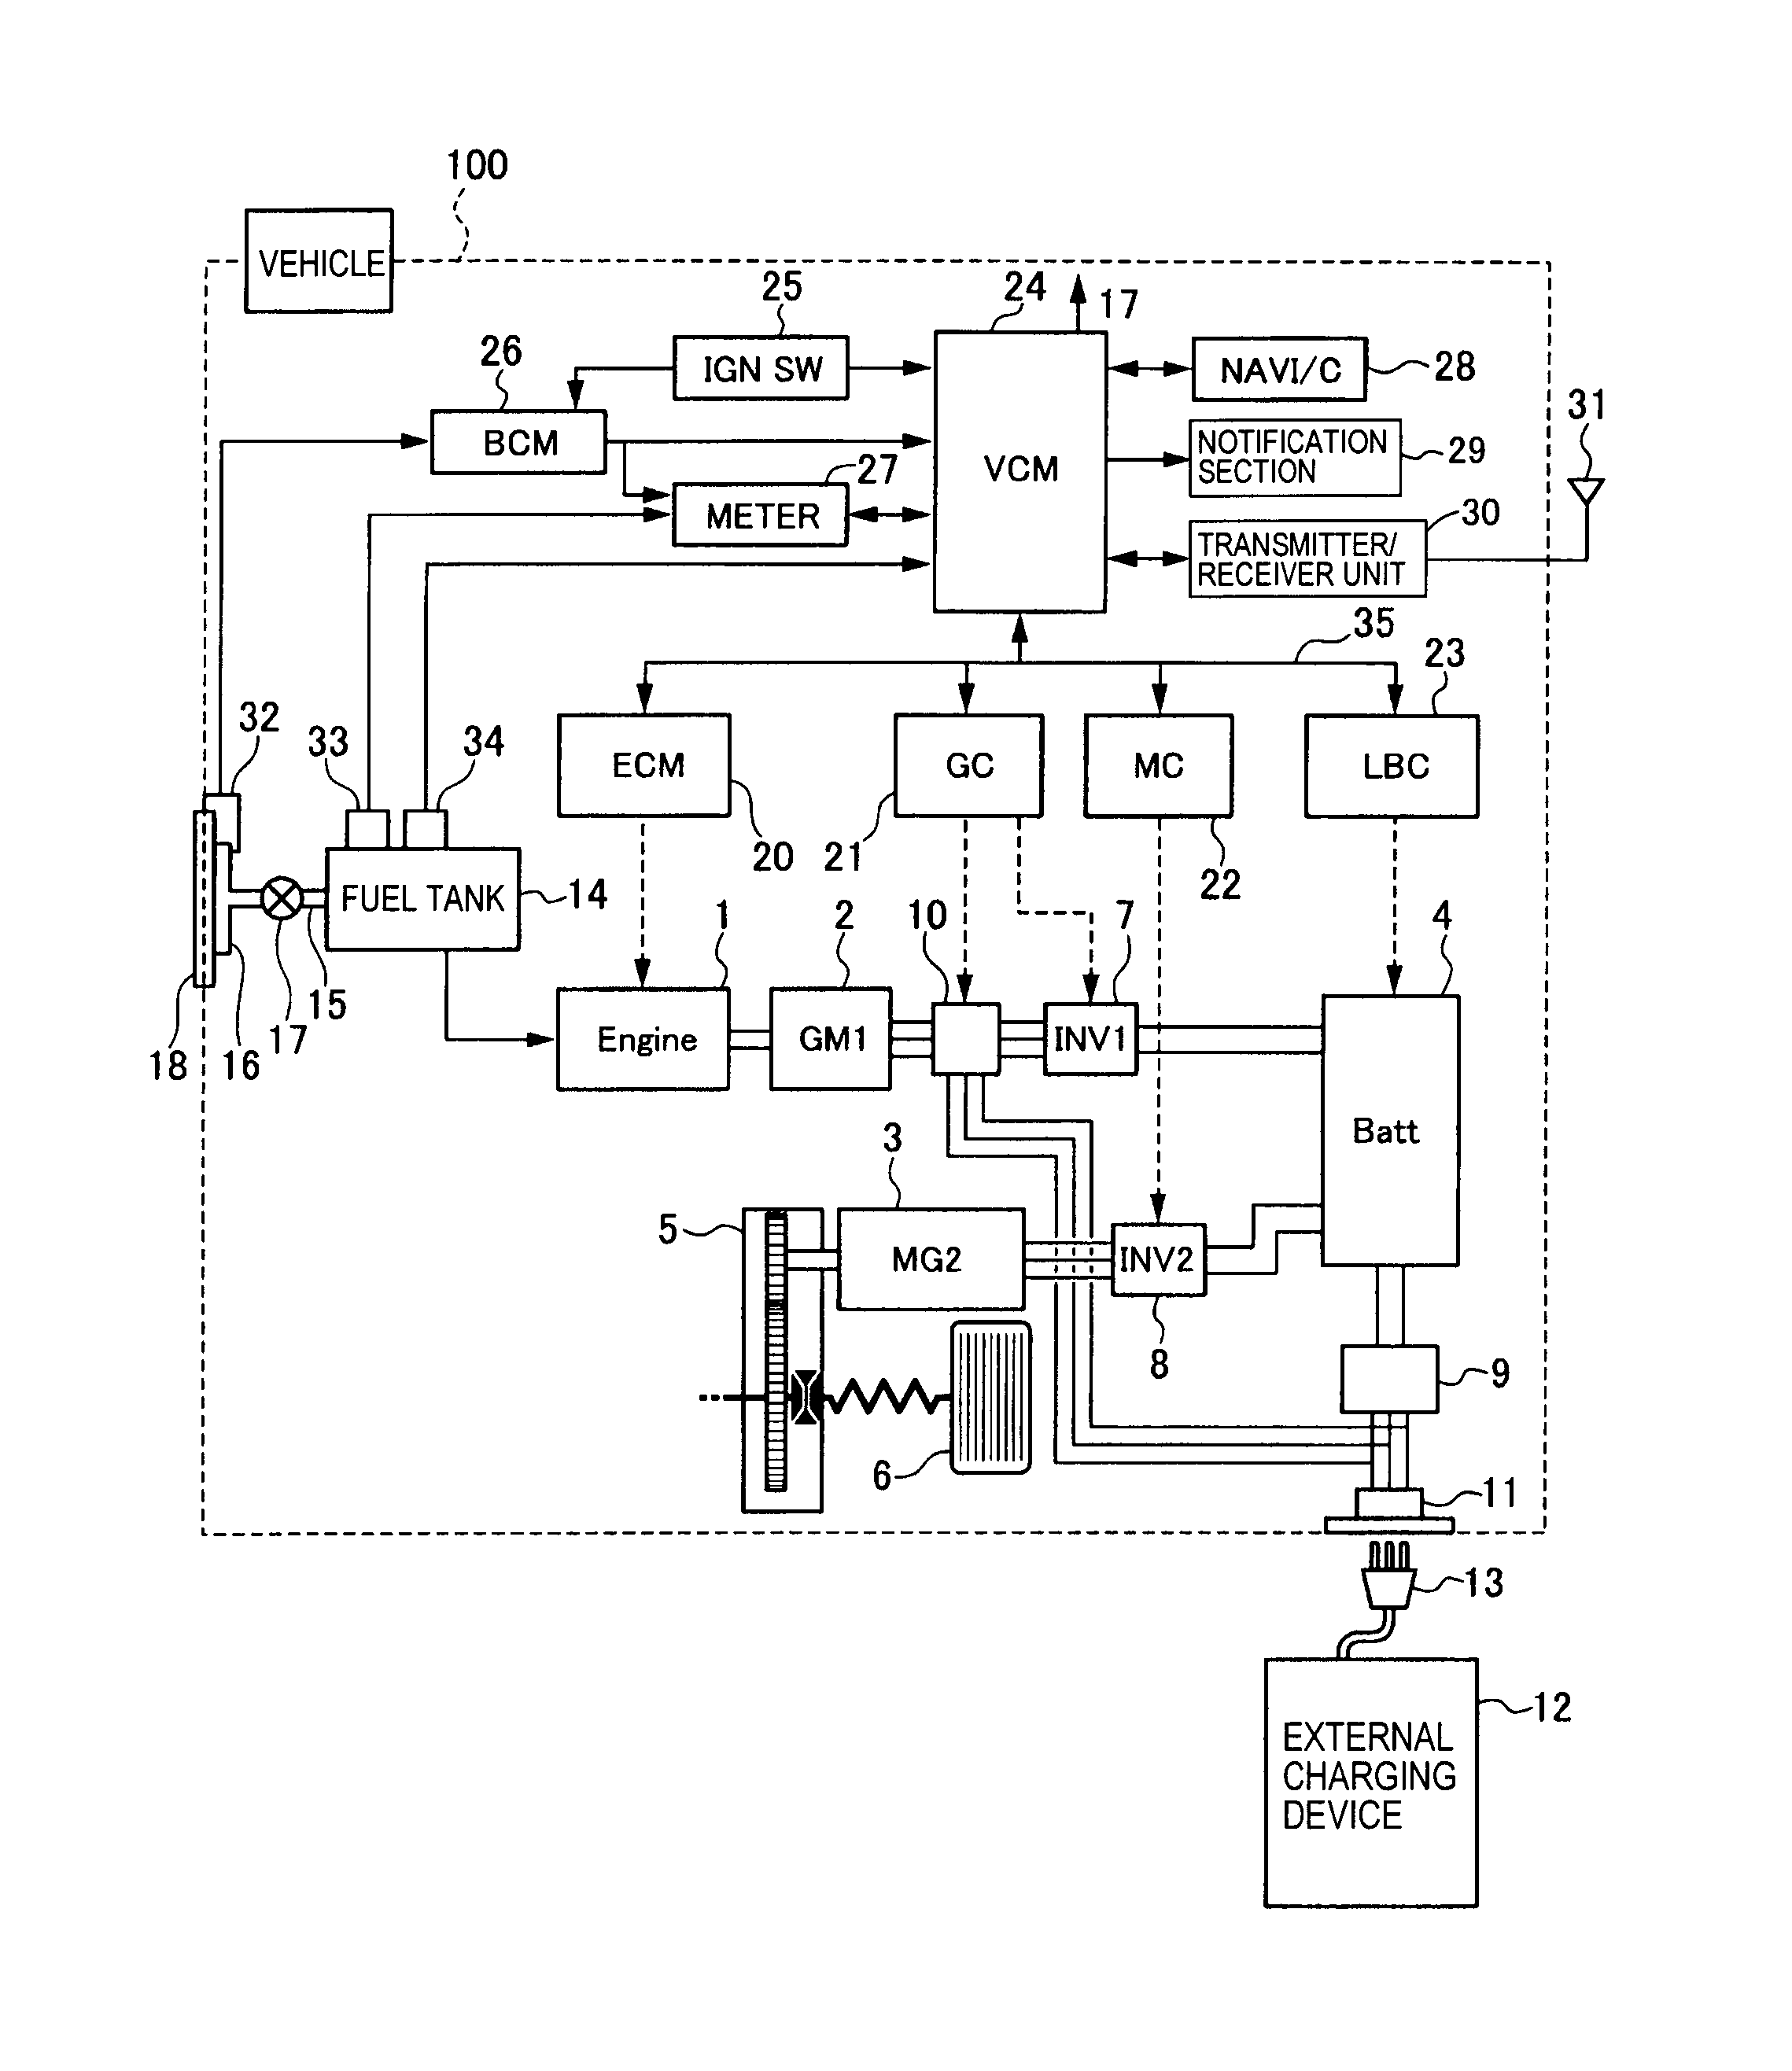 aiphone jf-1md wiring diagram